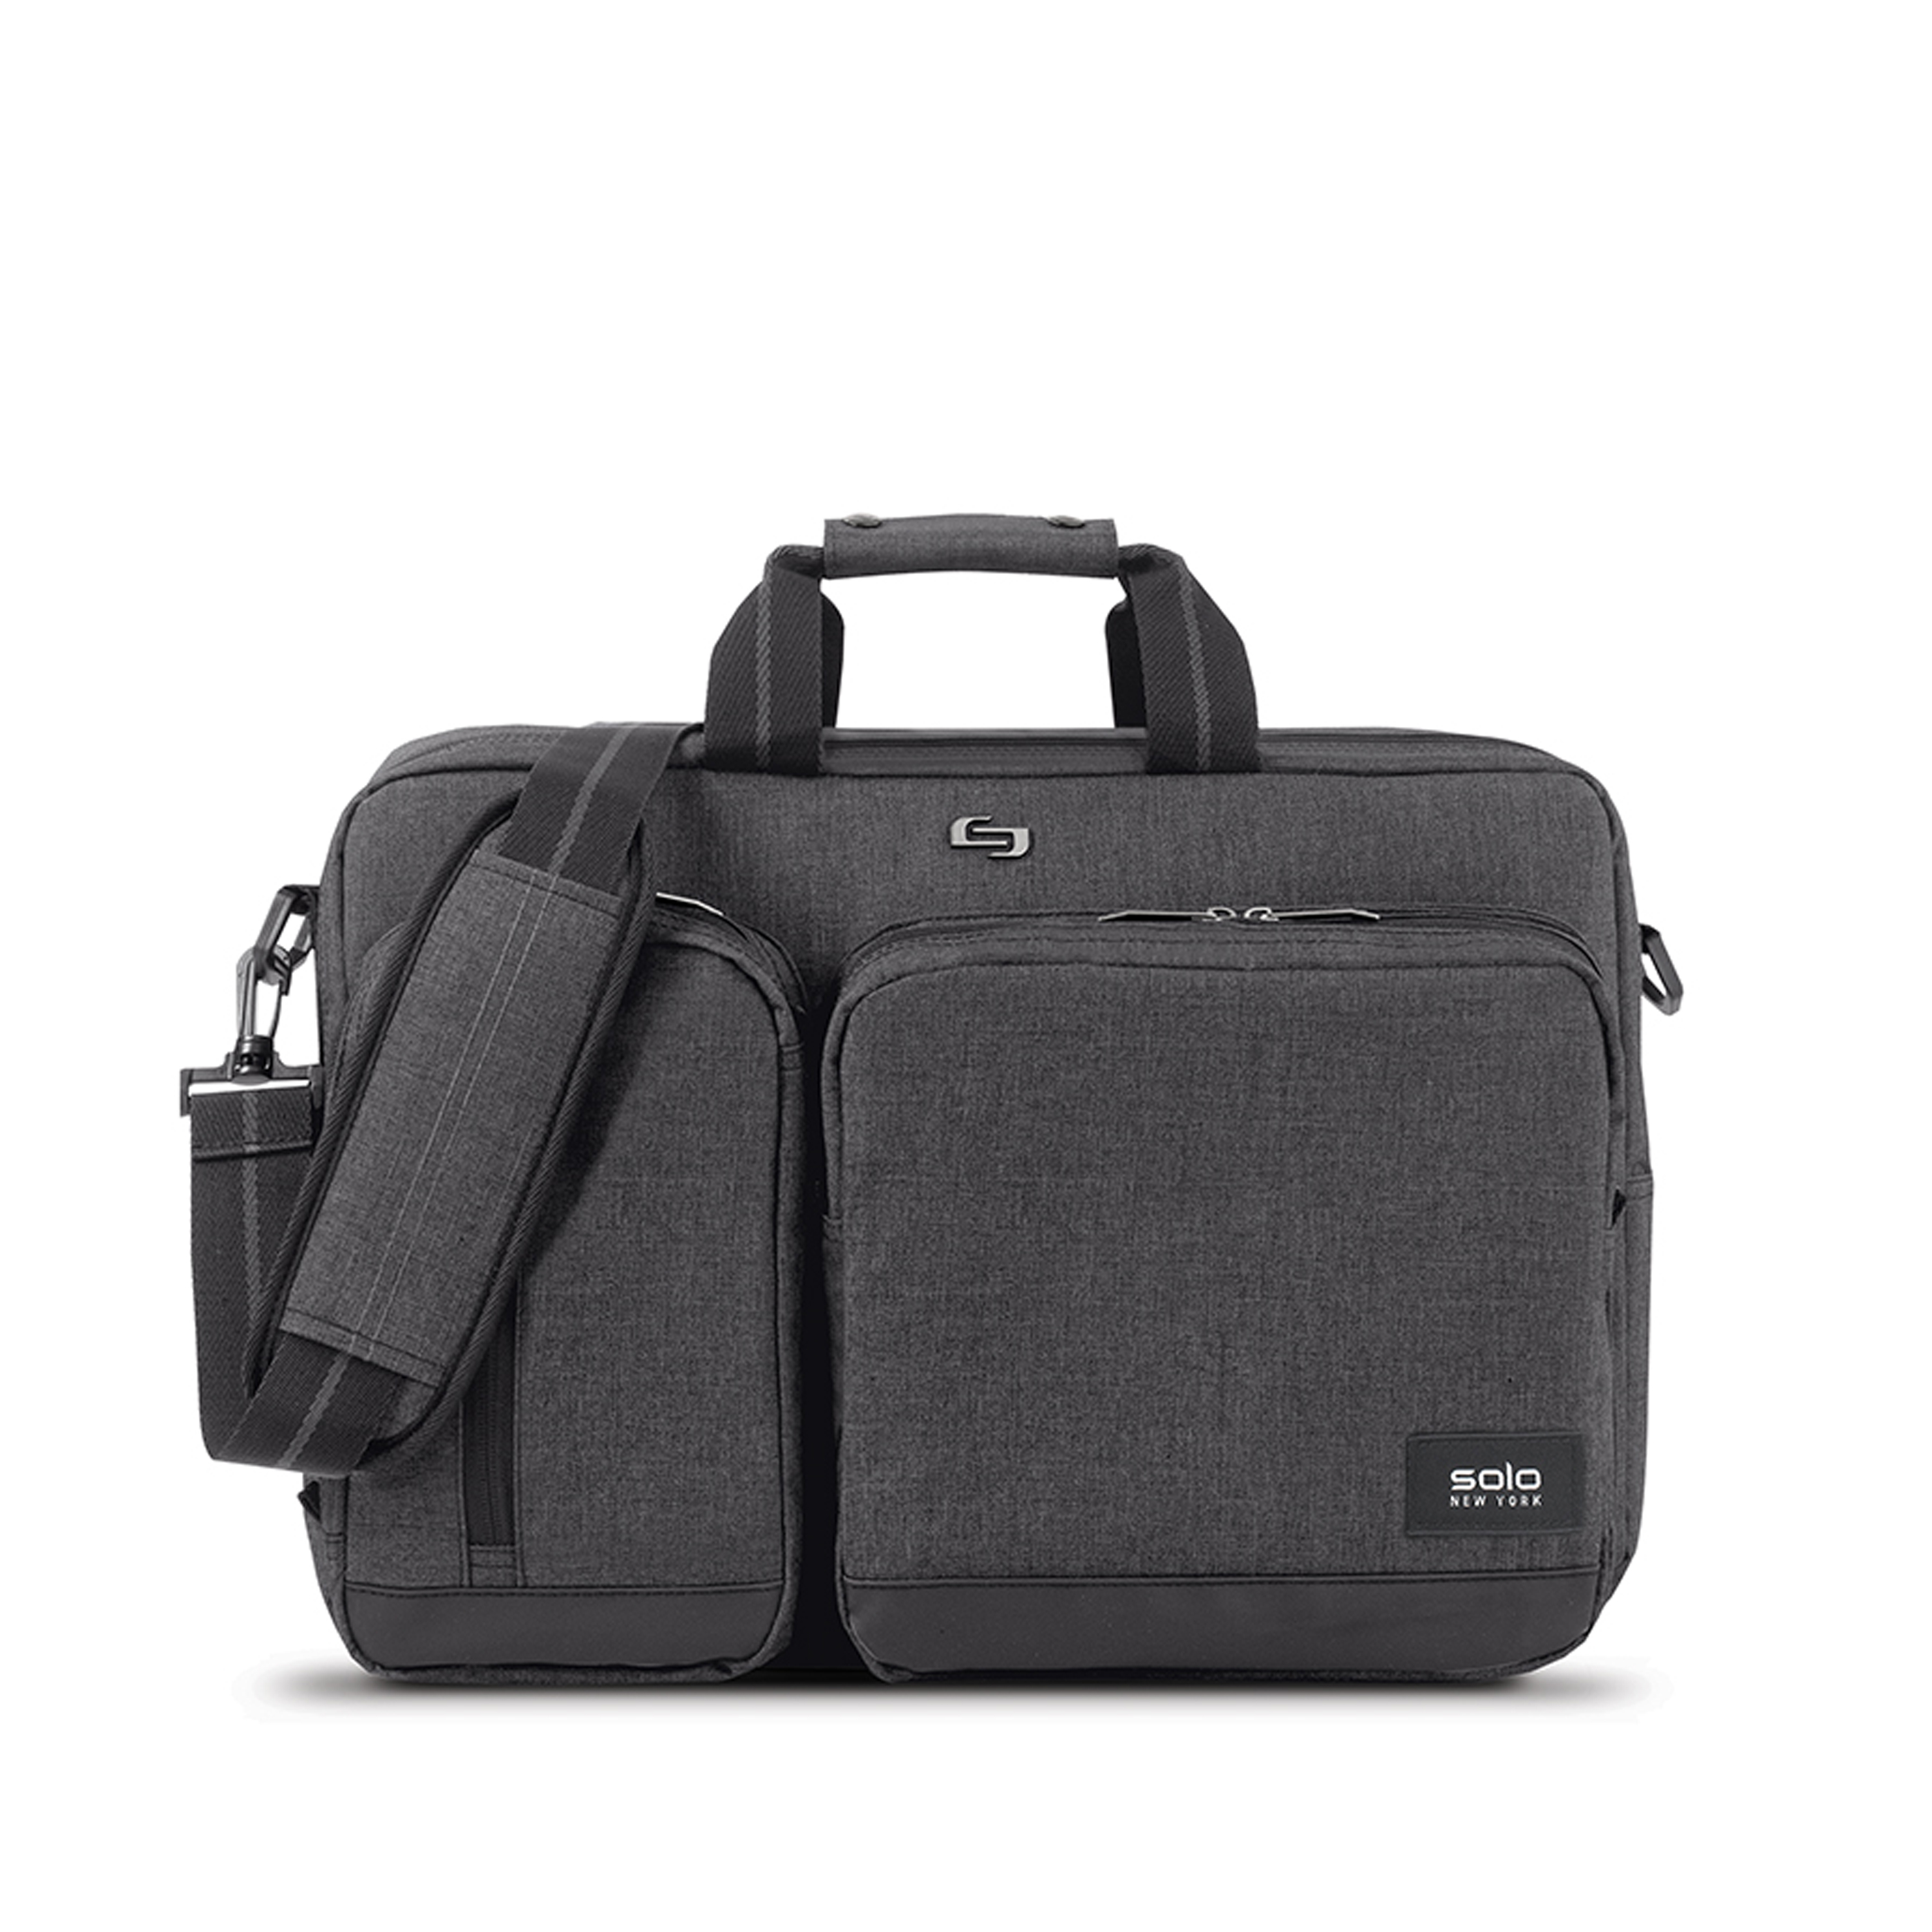 Solo New York Duane Hybrid Briefcase Backpack, Gray, Laptop Tote - image 1 of 22